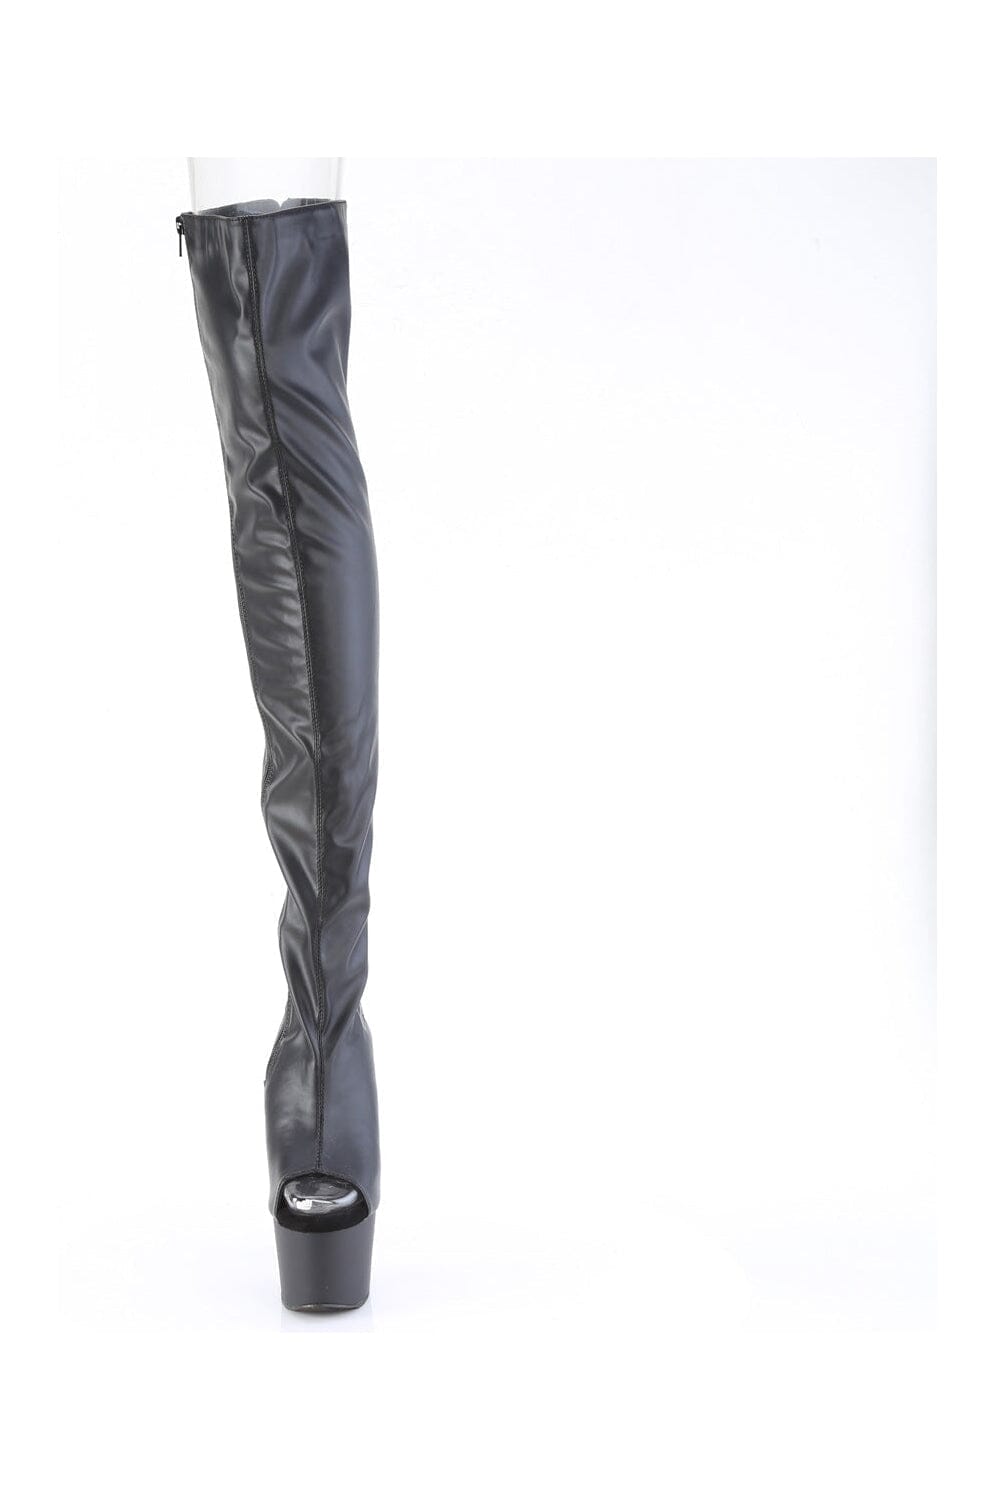 ADORE-3017 Black Faux Leather Thigh Boot-Thigh Boots-Pleaser-SEXYSHOES.COM